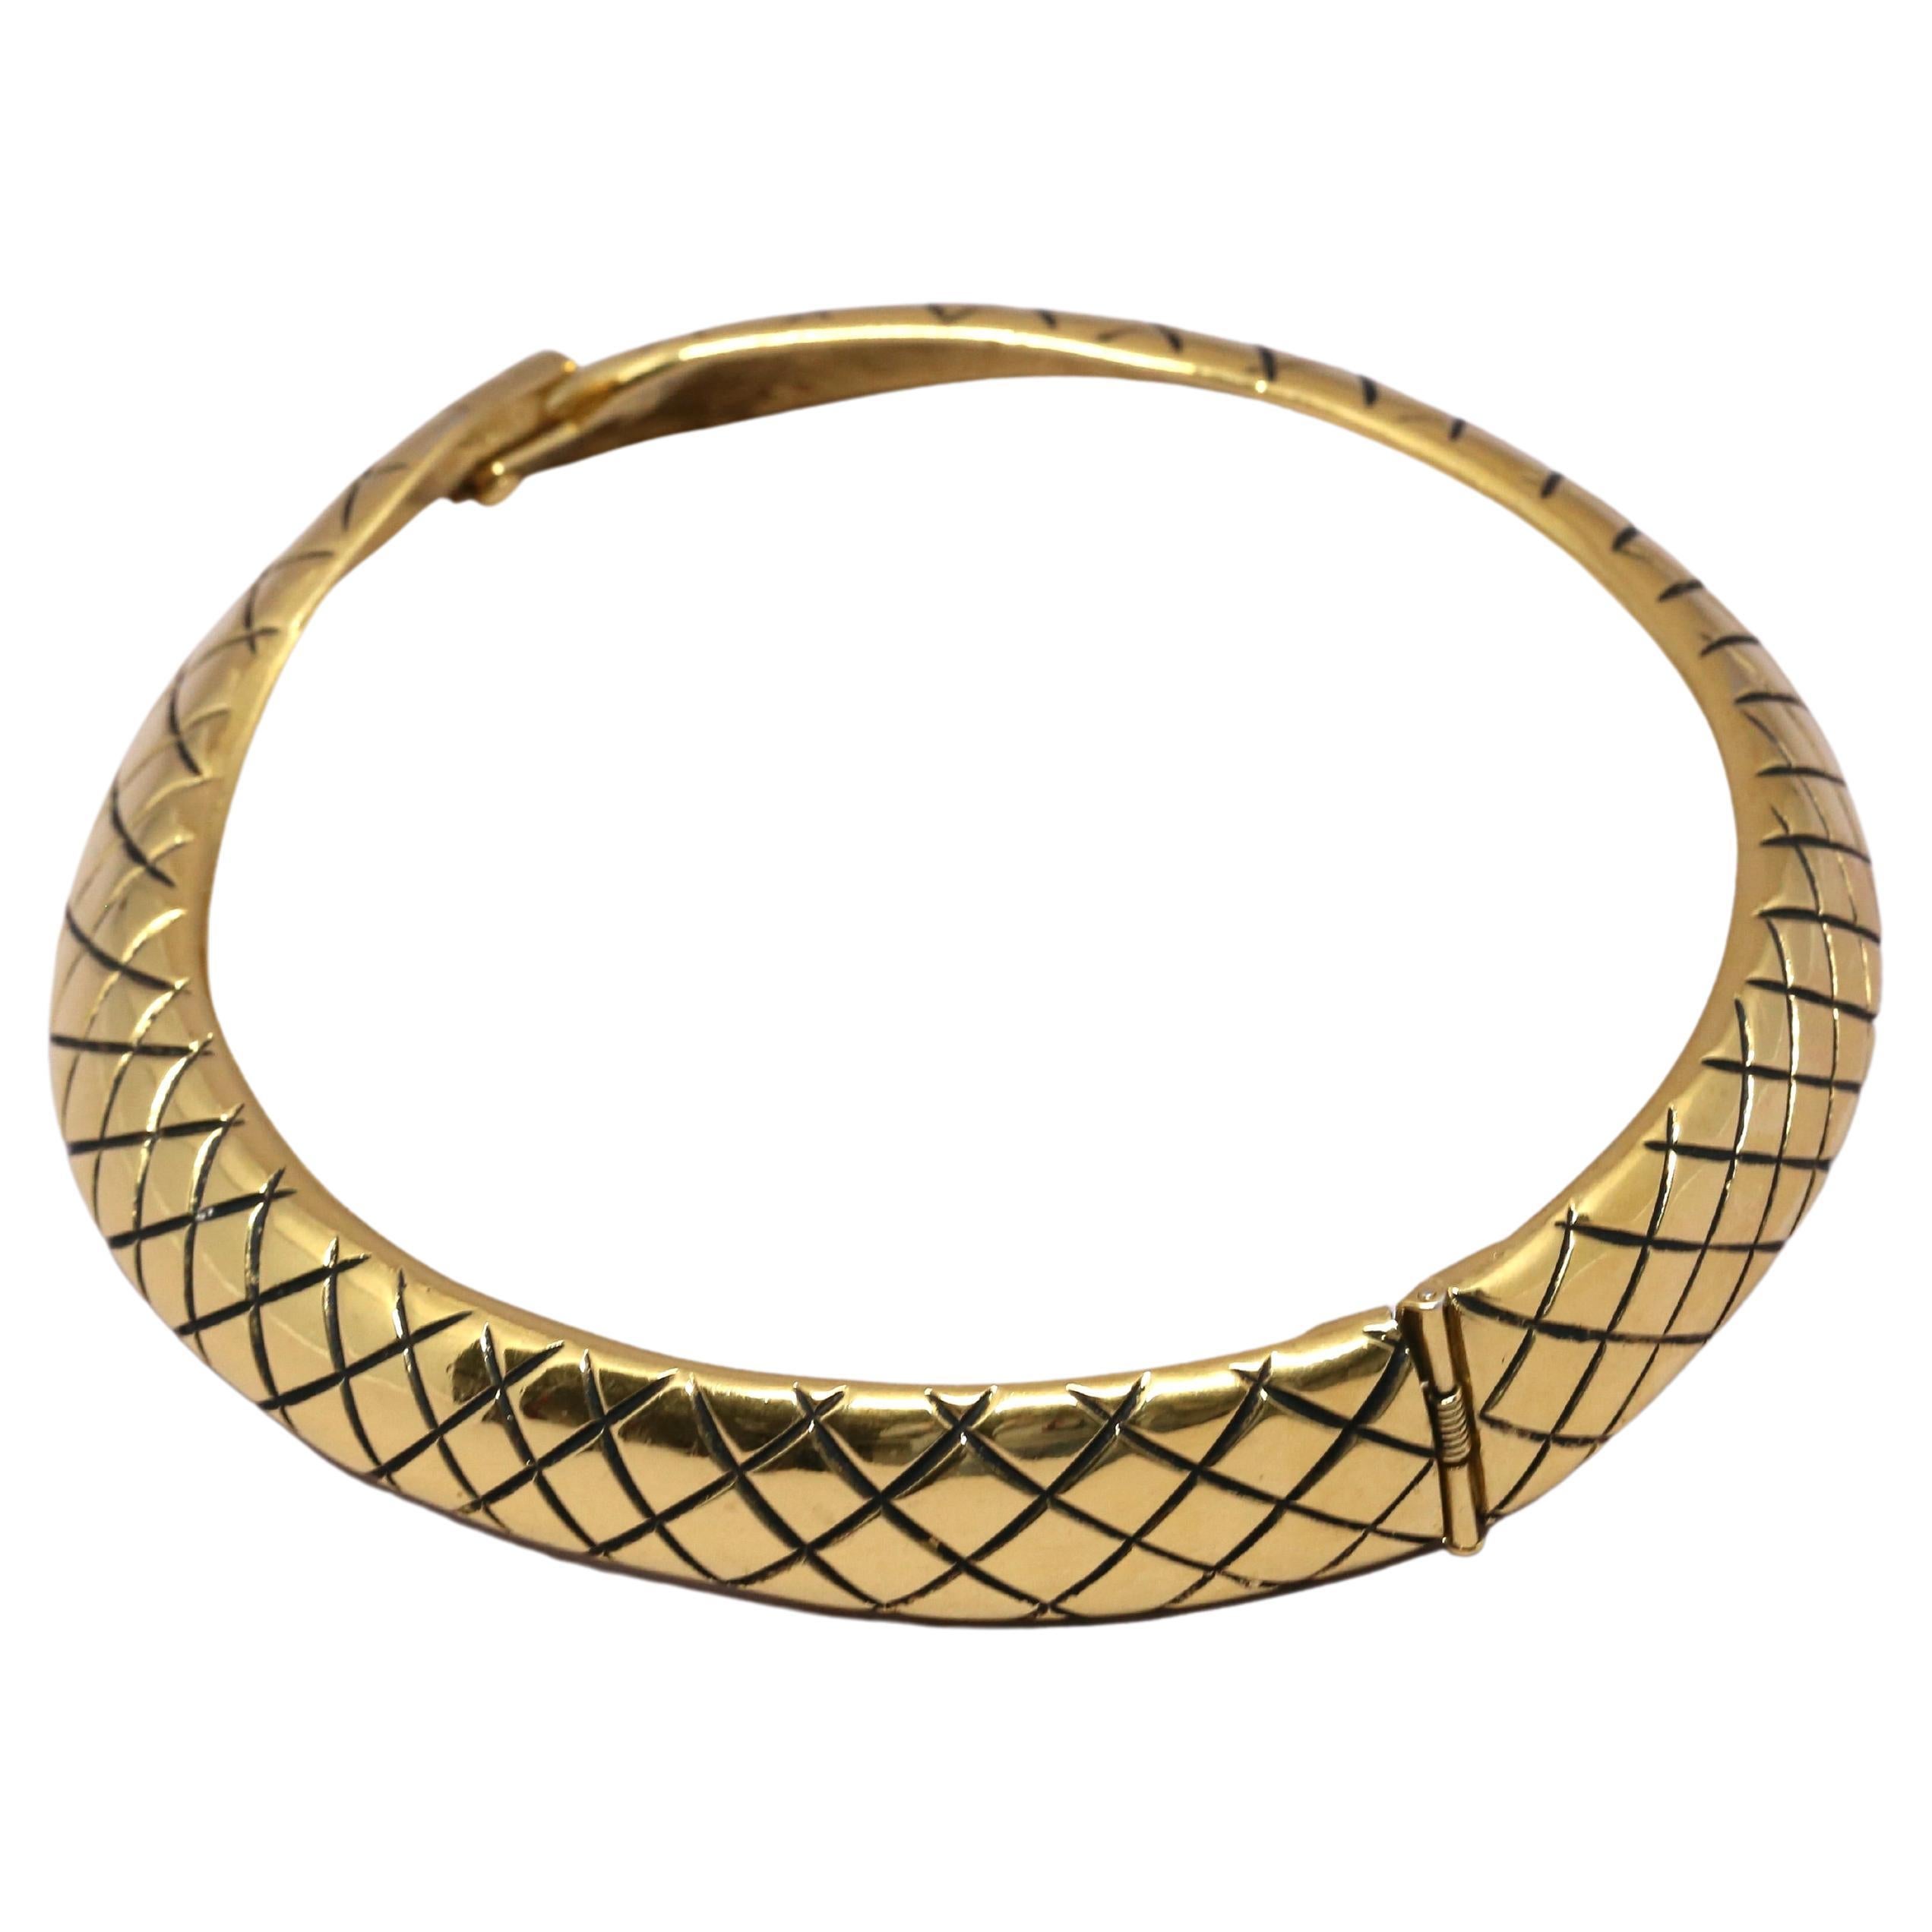 Very unique, gilt-metal necklace in the form of a stylized snake from Yves Saint Laurent dating to the 1980's. Fits a smaller sized neck. Measures approximately 13-13.5